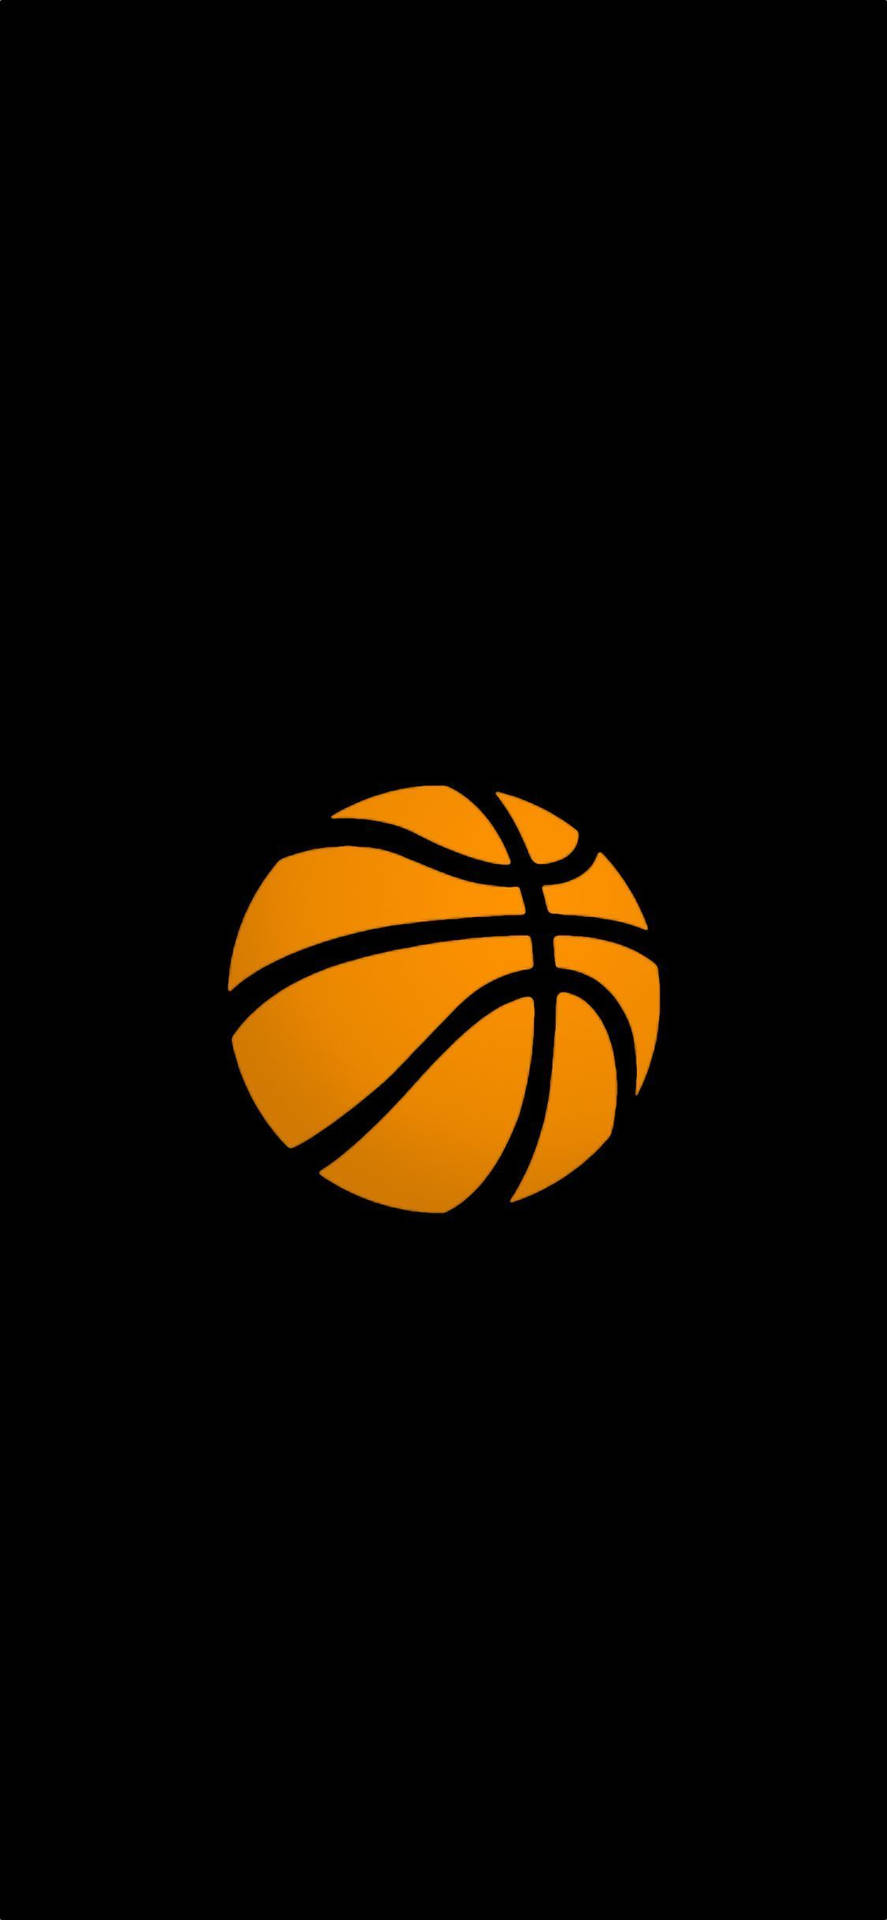 Simple Ball Cool Basketball Iphone Background